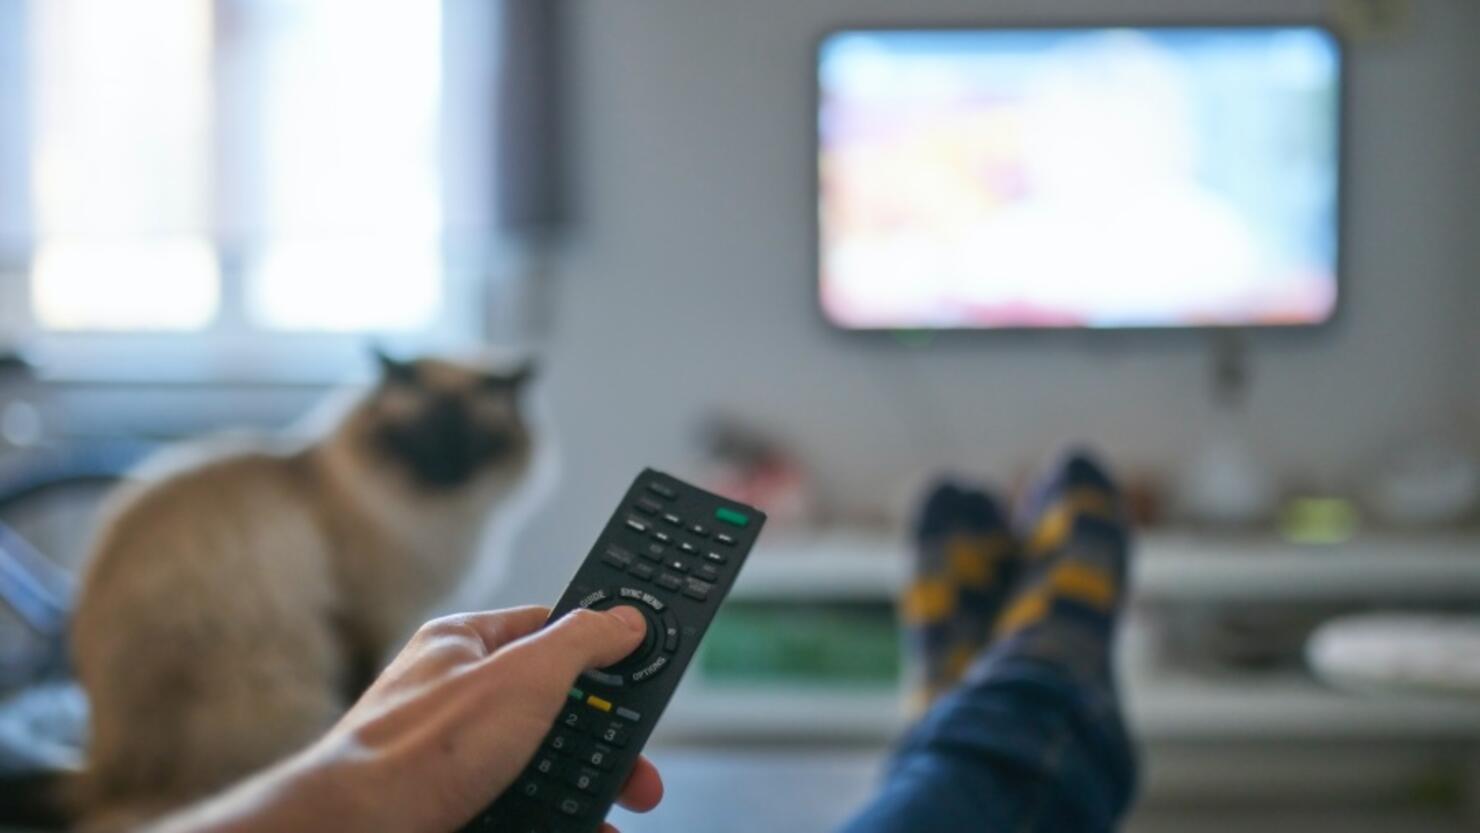 Hand of man pointing remote control at working television screen